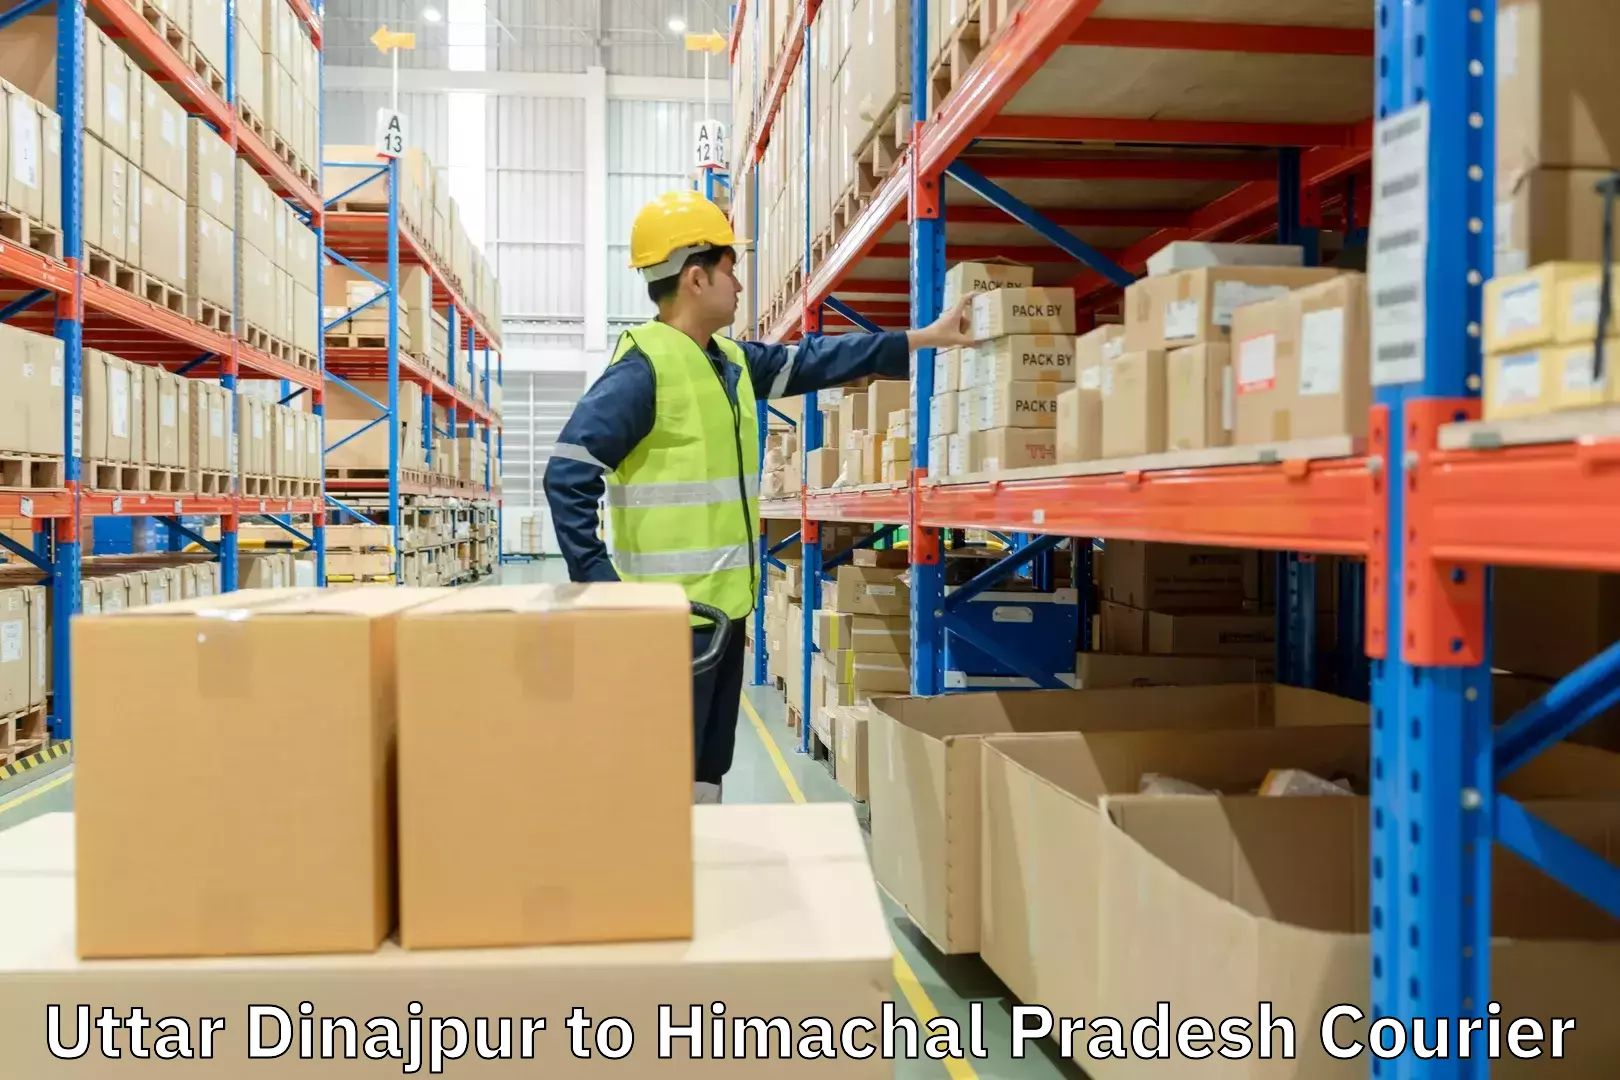 State-of-the-art courier technology Uttar Dinajpur to Himachal Pradesh